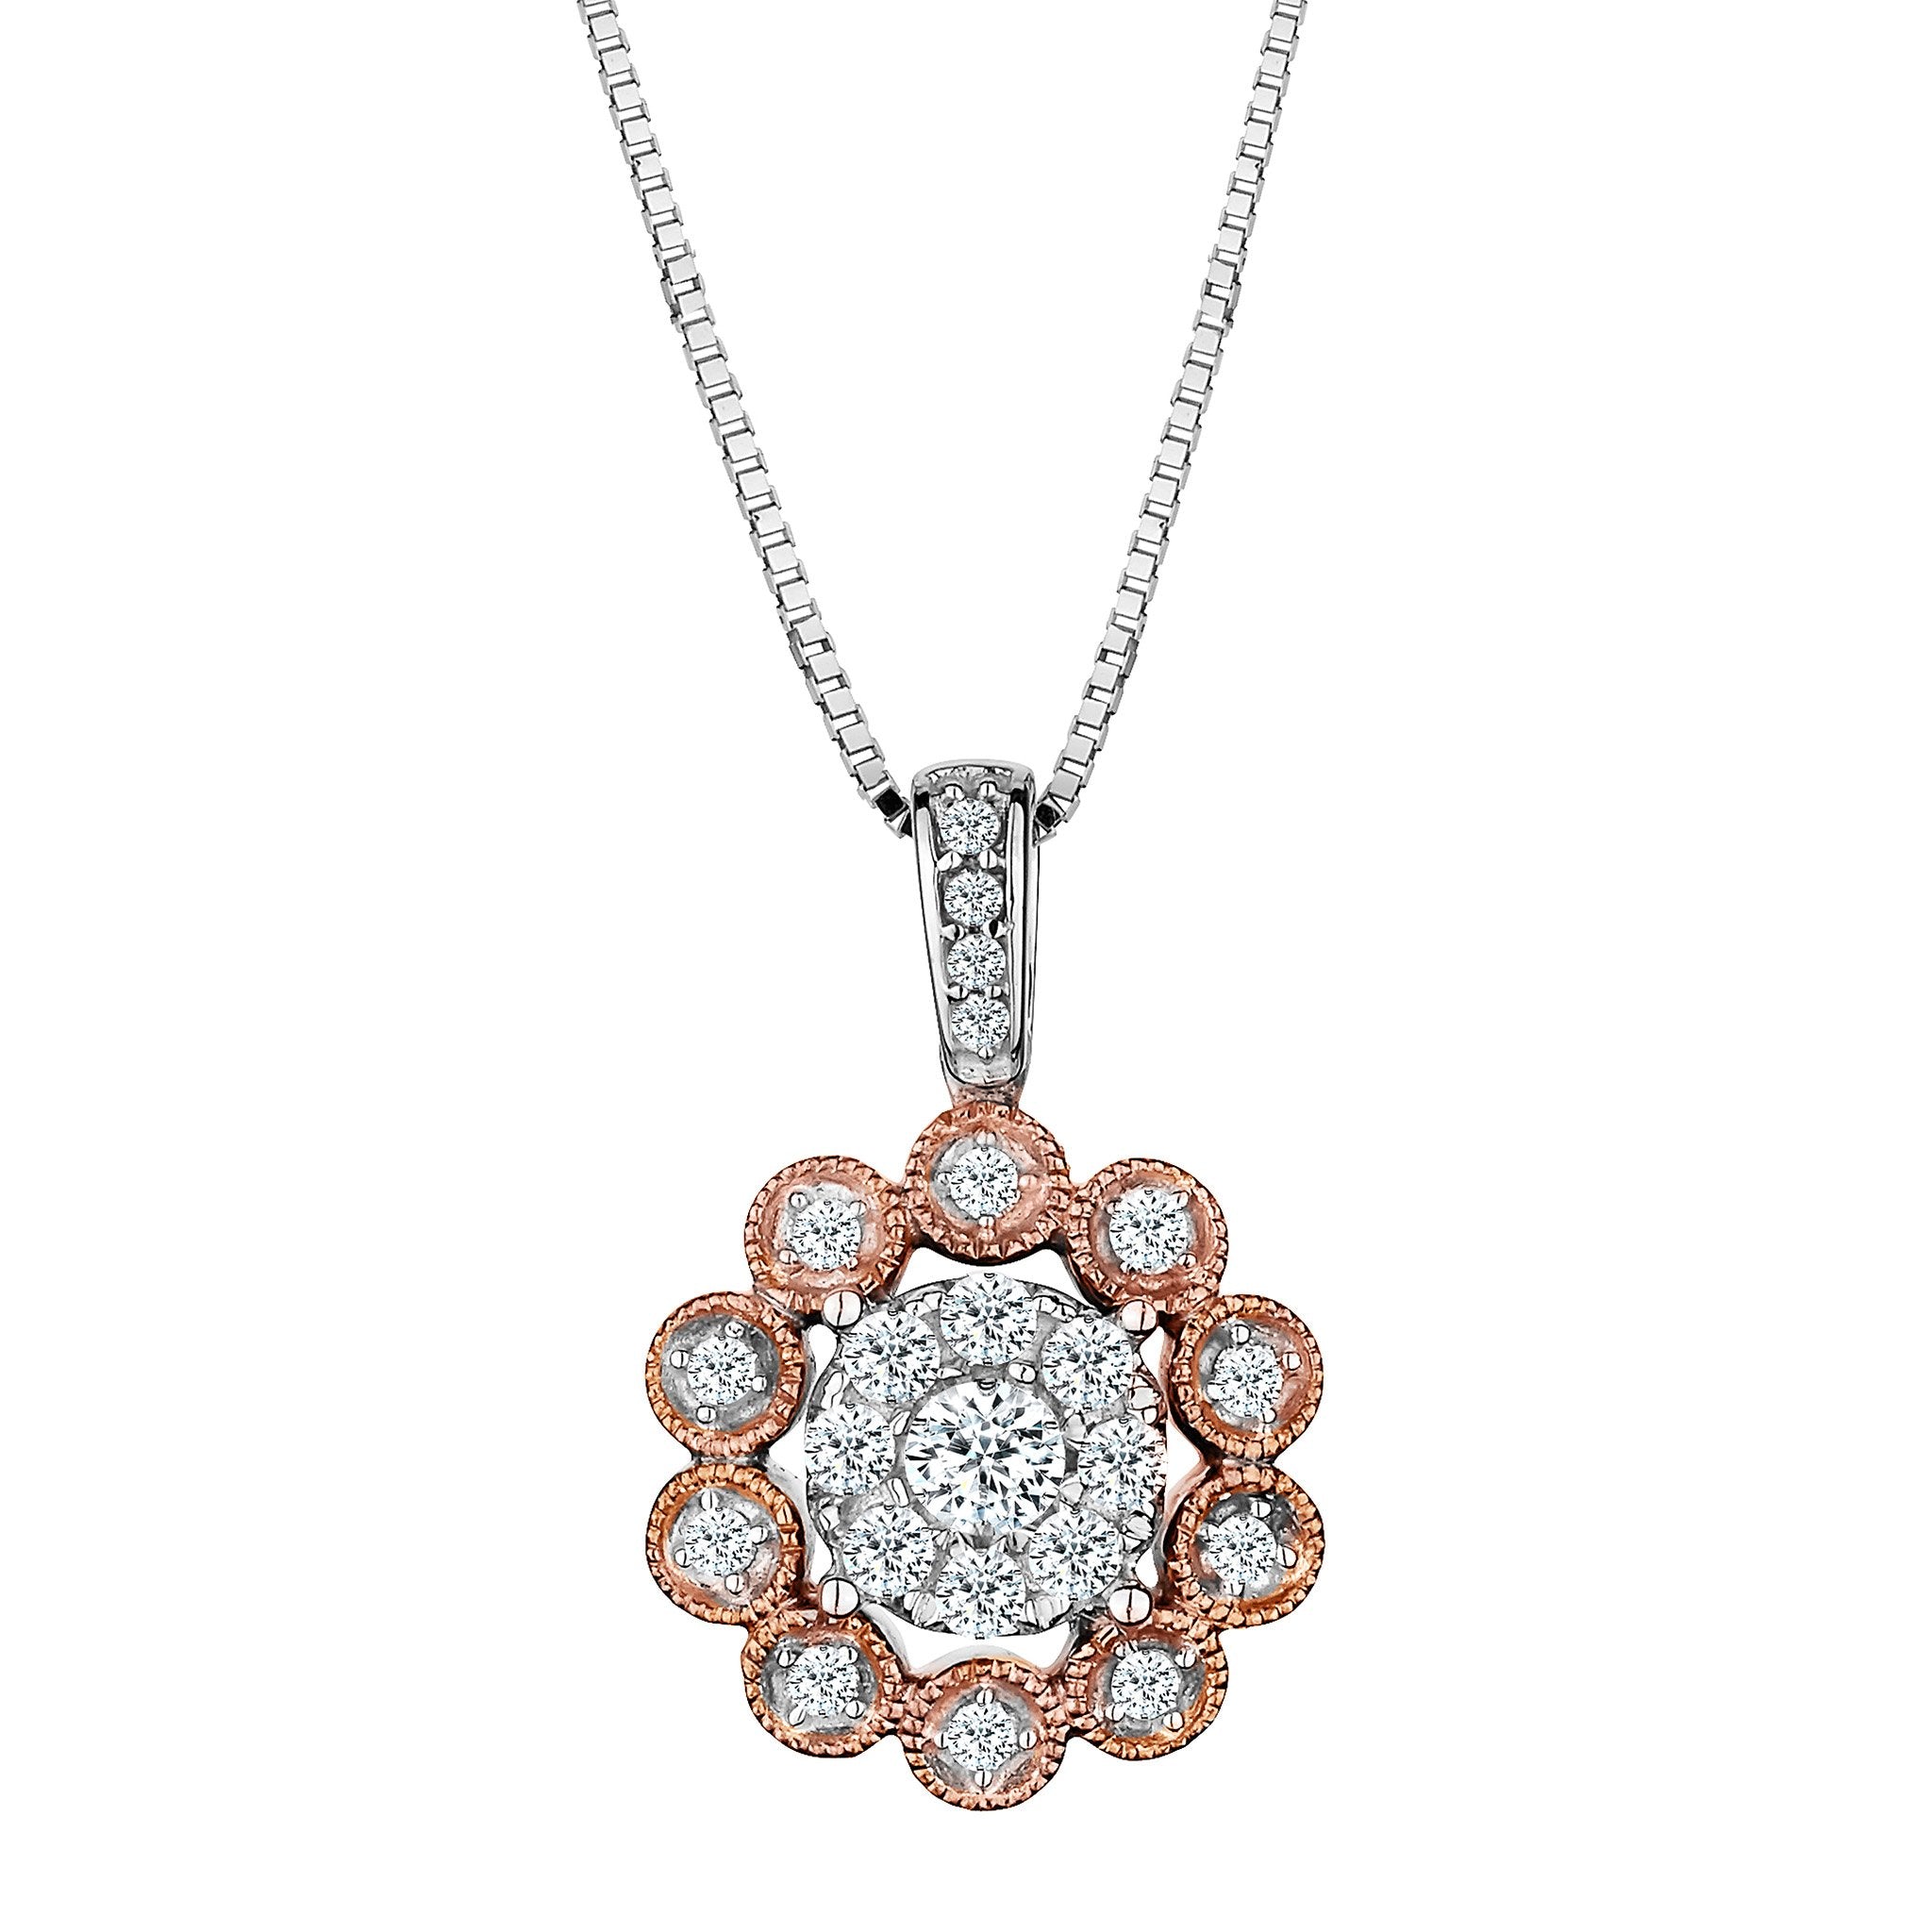 .17 Carat Diamond Pendant, 10kt Rose Gold And White Gold (Two Tone)......................Now